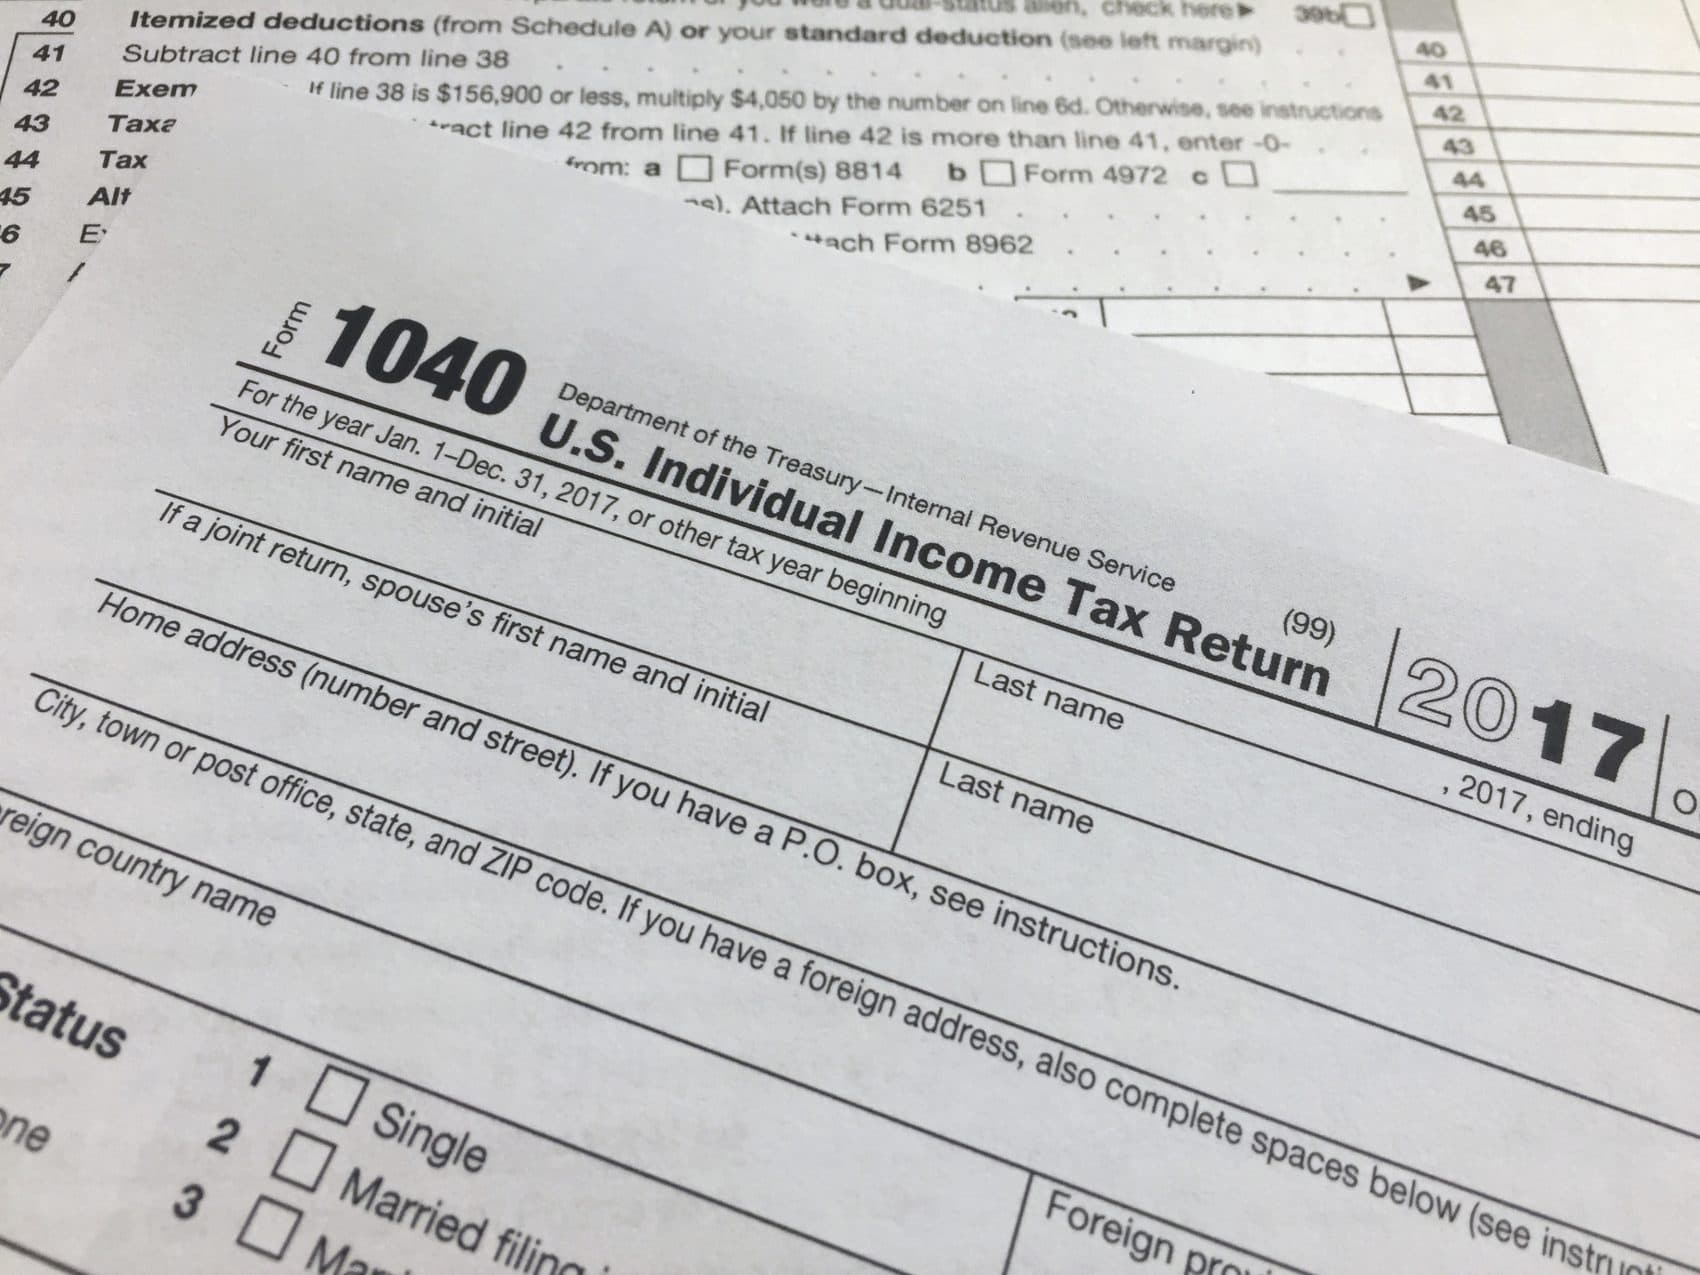 Irs Forms 2022 Schedule A Tax Season Is Right Around The Corner: Here's How You Can Get A Head Start  Before 2022 | Here & Now